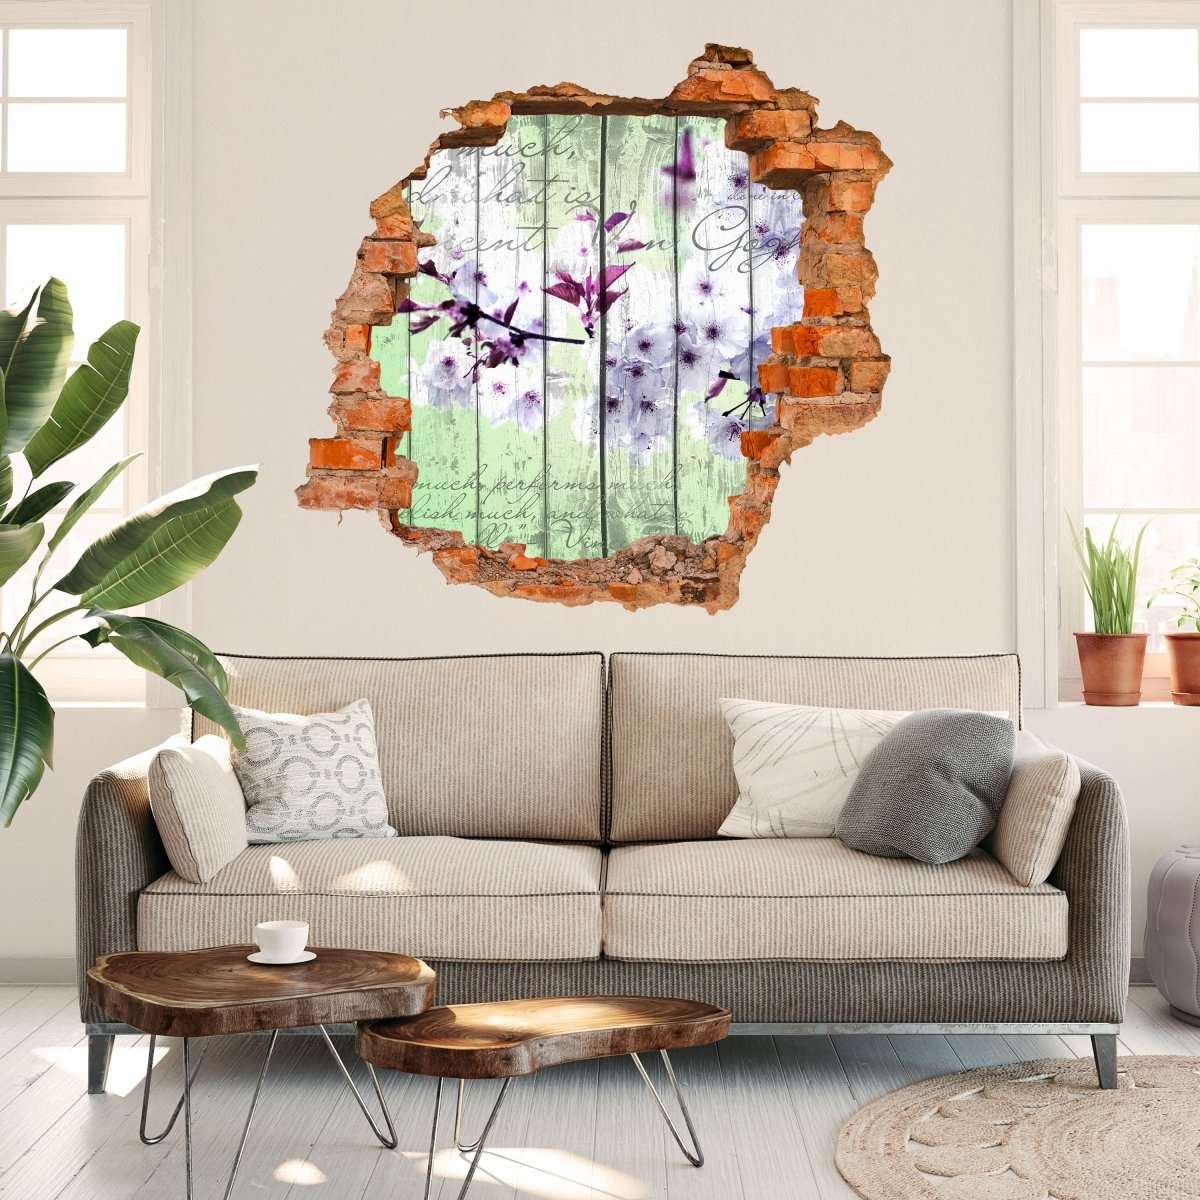 3D wall sticker wood blossom branch - Wall Decal M0542